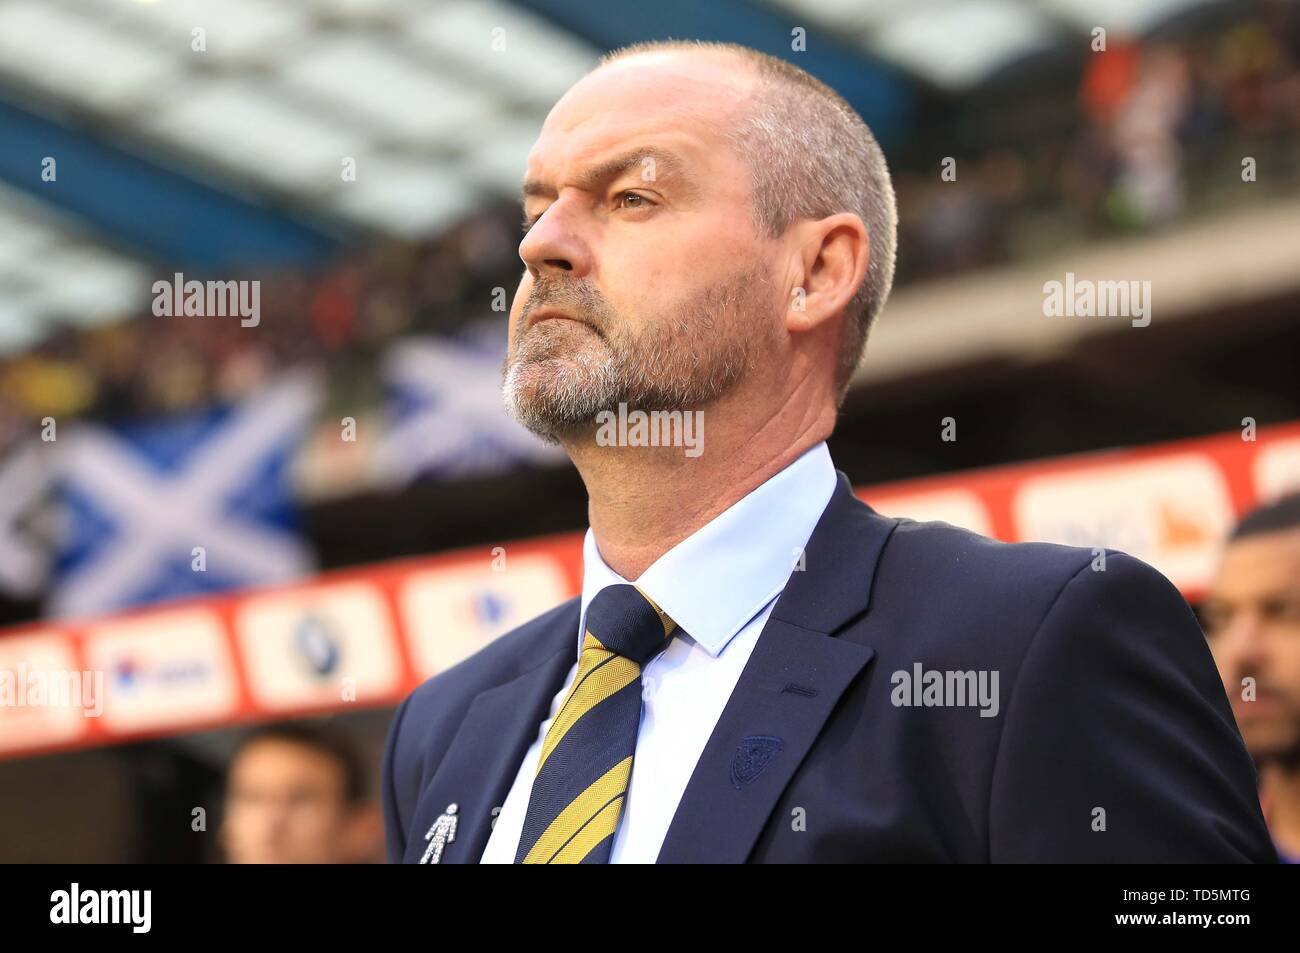 Scotland manager Steve Clarke before the UEFA Euro 2020 Qualifying, Group I match at the King Baudouin Stadium, Brussels. PRESS ASSOCIATION Photo. Picture date: Tuesday June 11, 2019. See PA story SOCCER Belgium. Photo credit should read: Bradley Collyer/PA Wire. RESTRICTIONS: Use subject to restrictions. Editorial use only. Commercial use only with prior written consent of the Scottish FA. Stock Photo